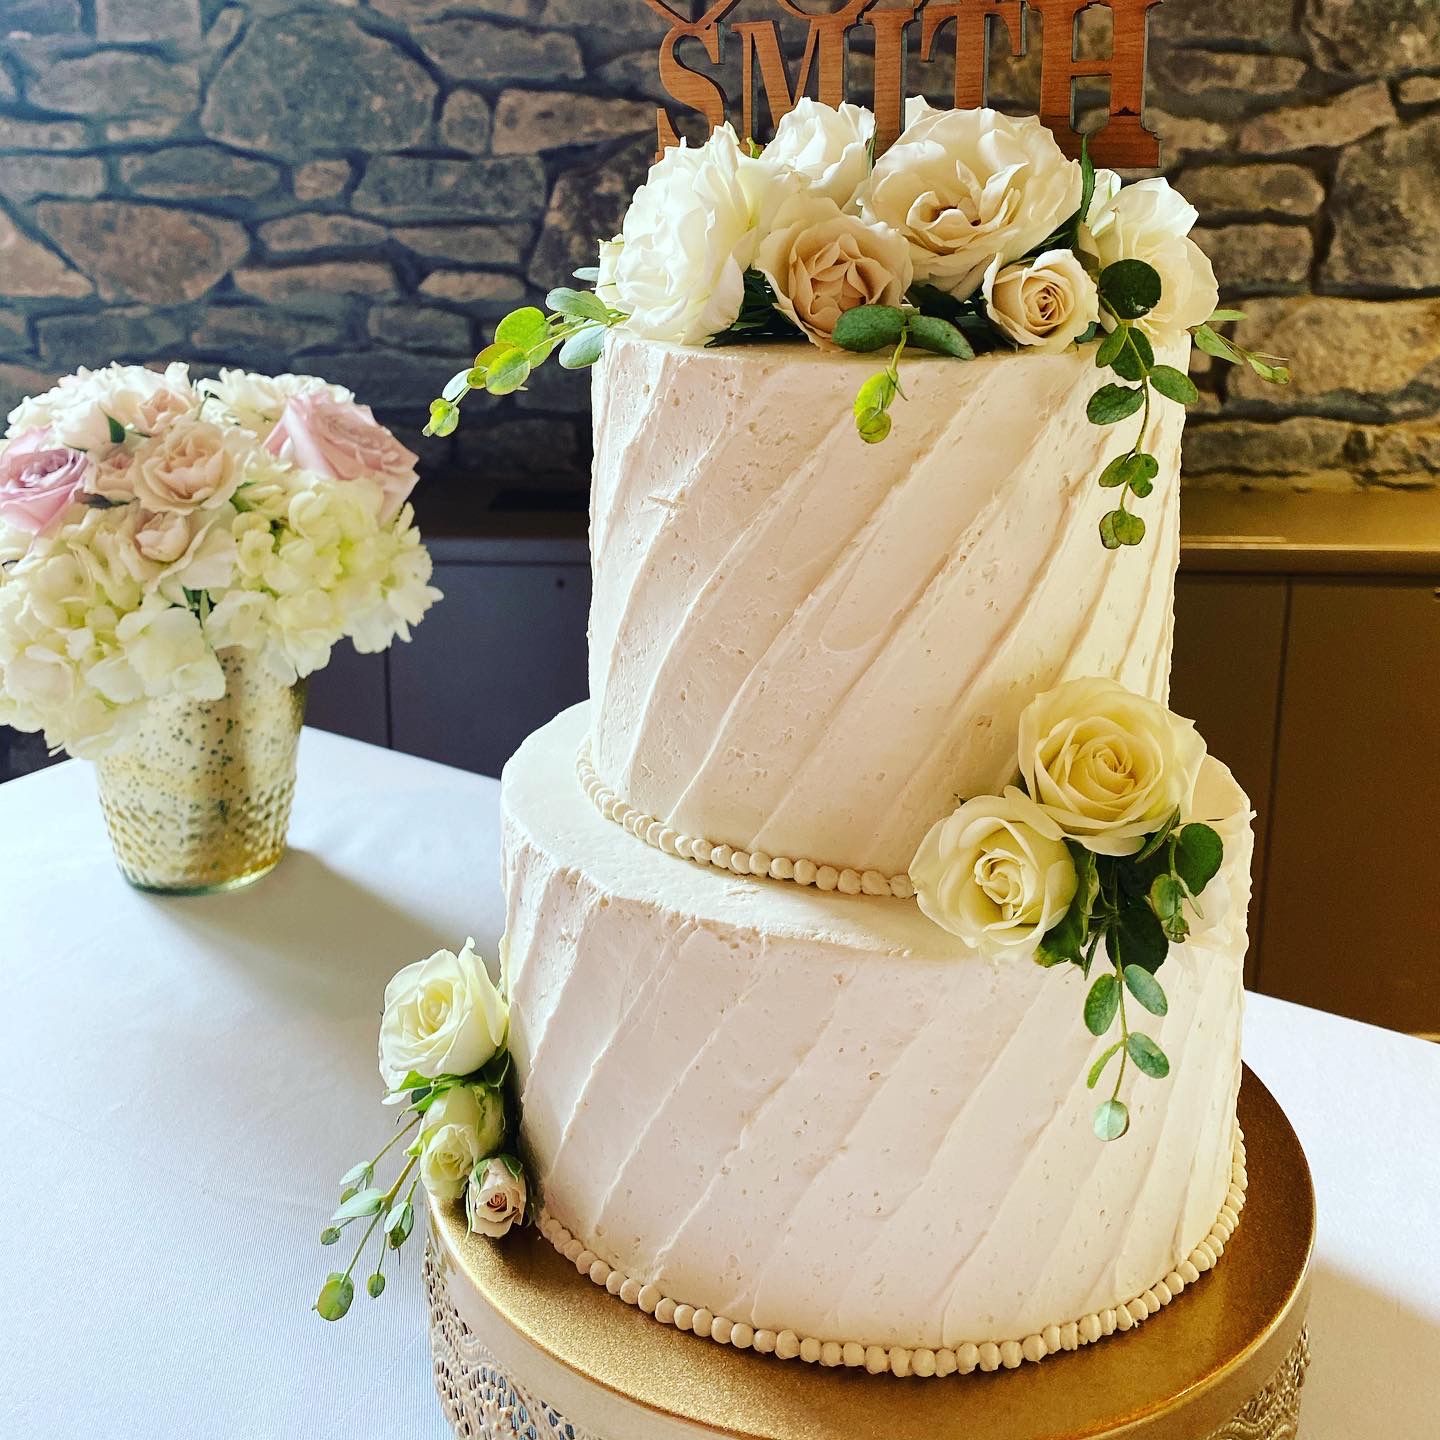 A beautiful 2-tier custom wedding cake with diagonal texture and live flowers from Village Patisserie in Toledo, Ohio